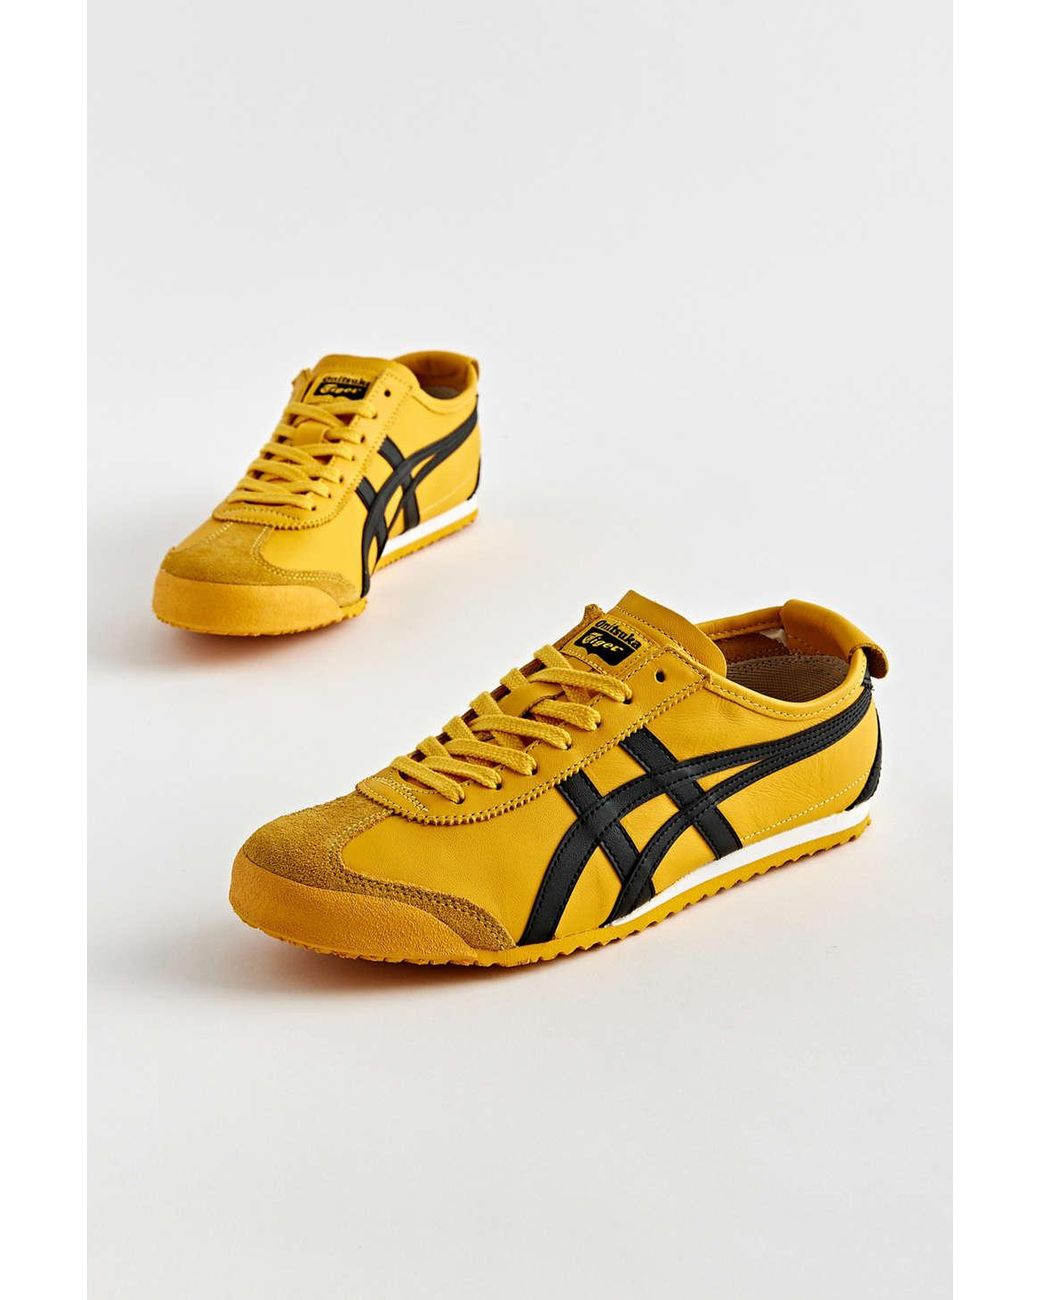 Studio 88 - The Studio 88 Exclusive Onitsuka Tiger Mexico 66 Mens Yellow  Black! This style takes inspiration from classic running shoes, the MEXICO  66 heritage shoe showcases a retro '60s look